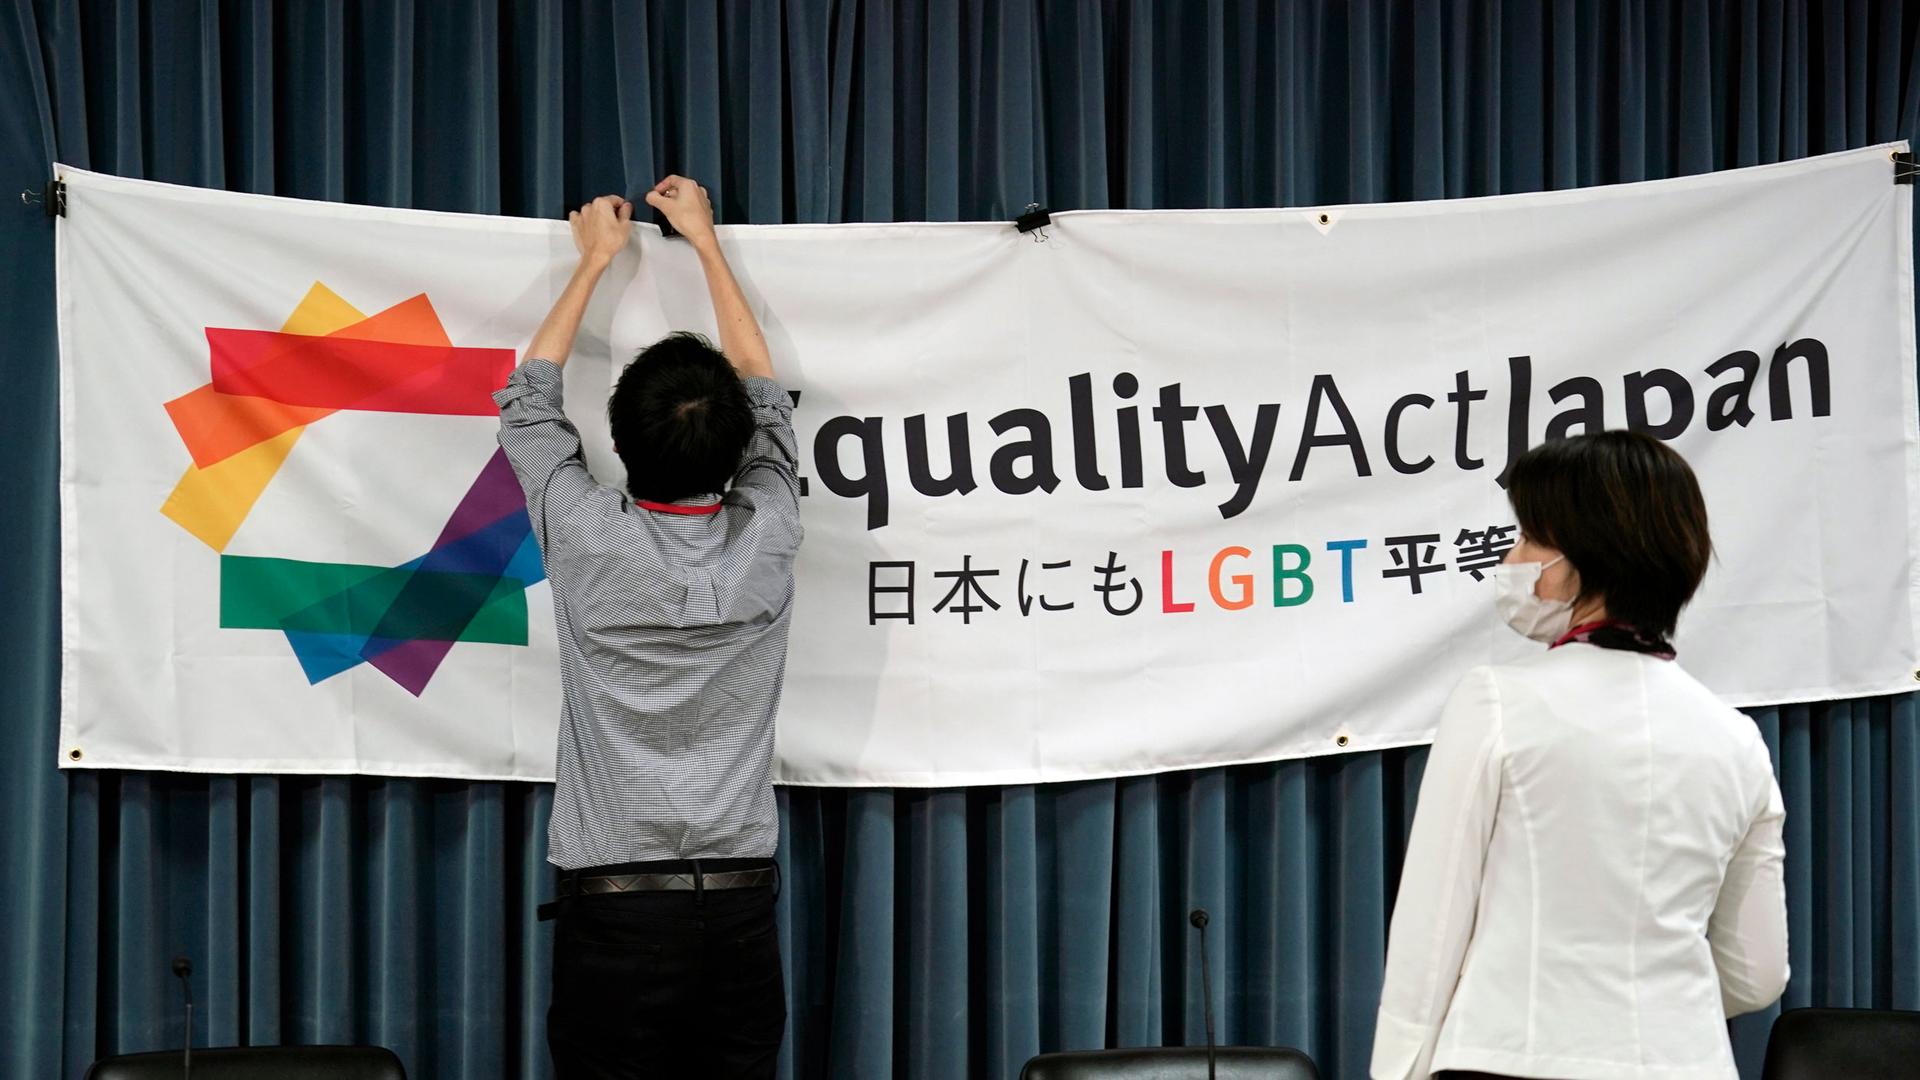 A person is shown clipping a large banner with the words, "Equality Act Japan" printed on it to a backdrop.